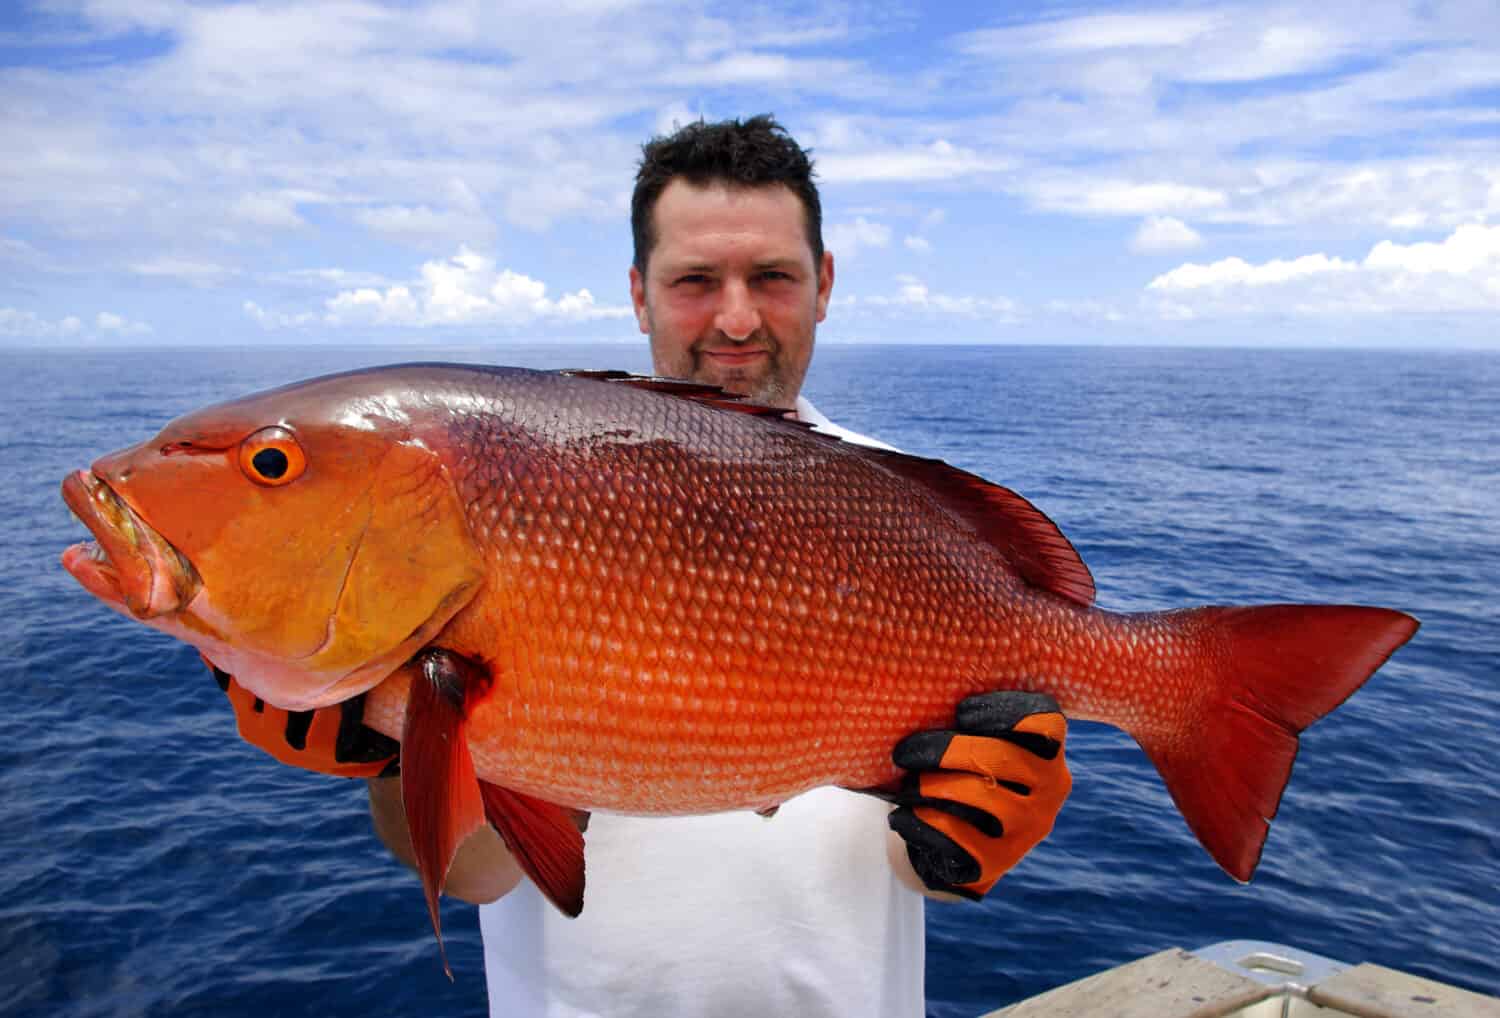 lucky  fisherman holding a beautiful red snapper